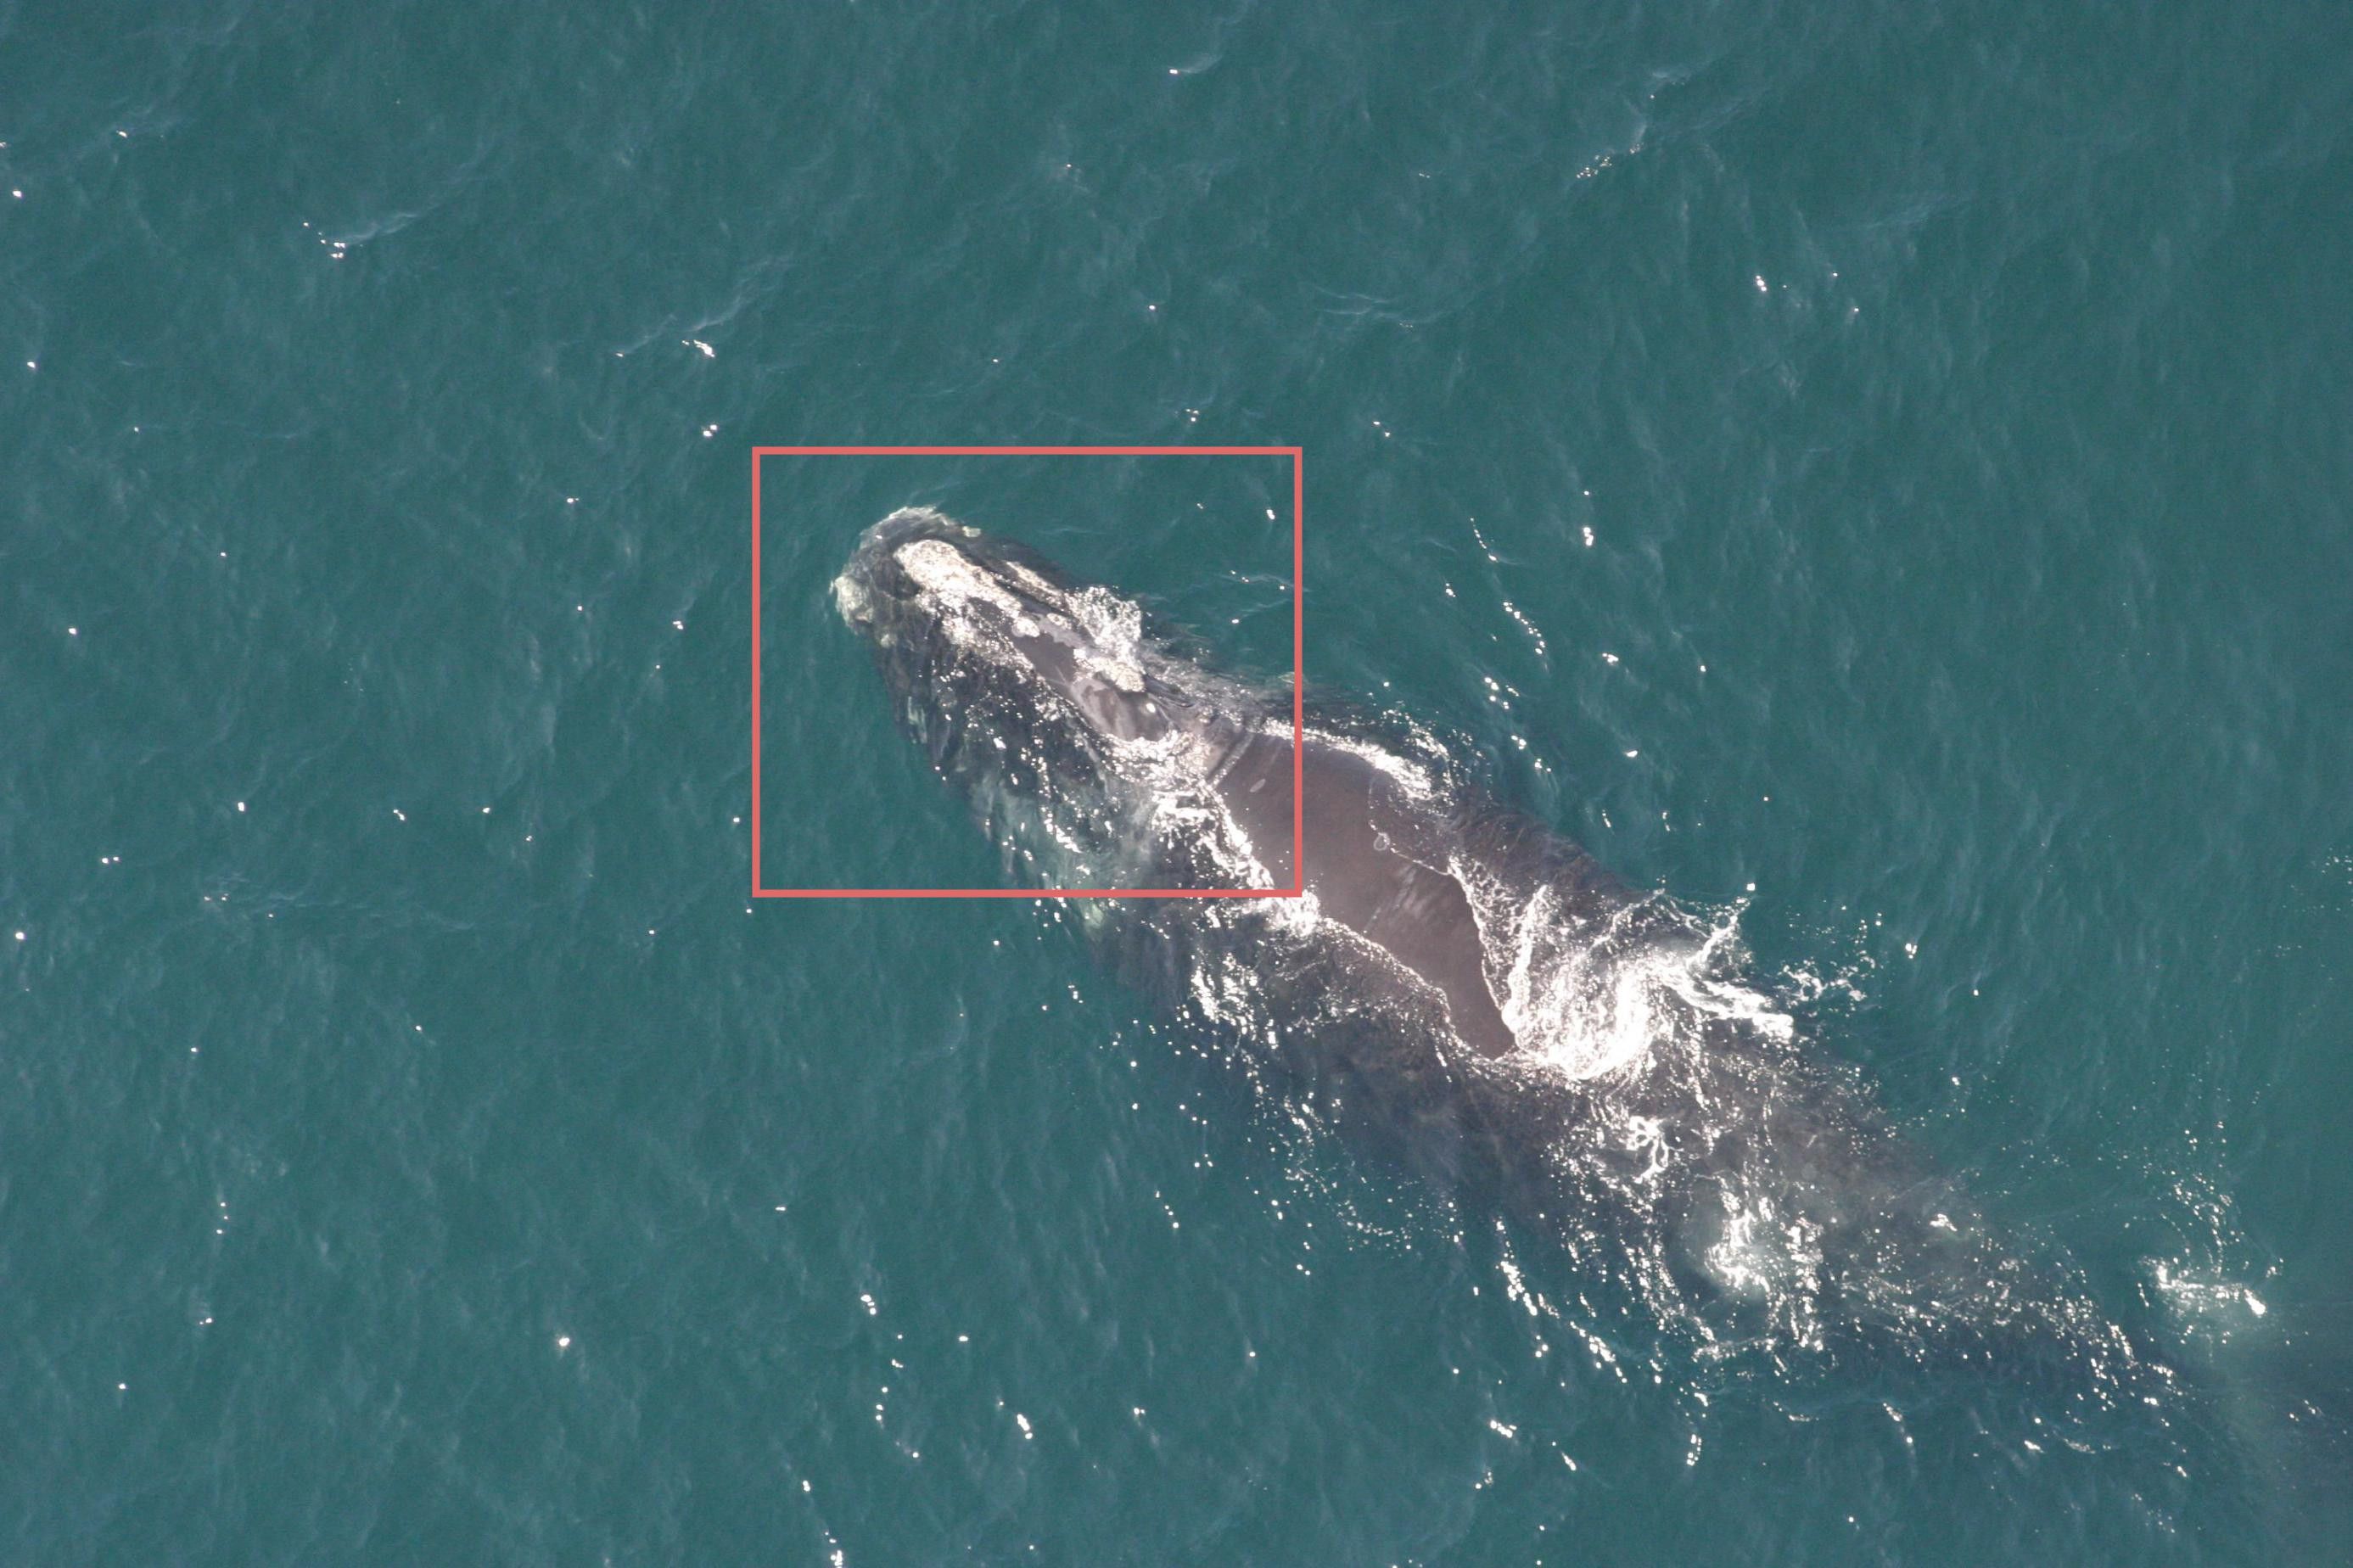 Whales detected from aerial photos